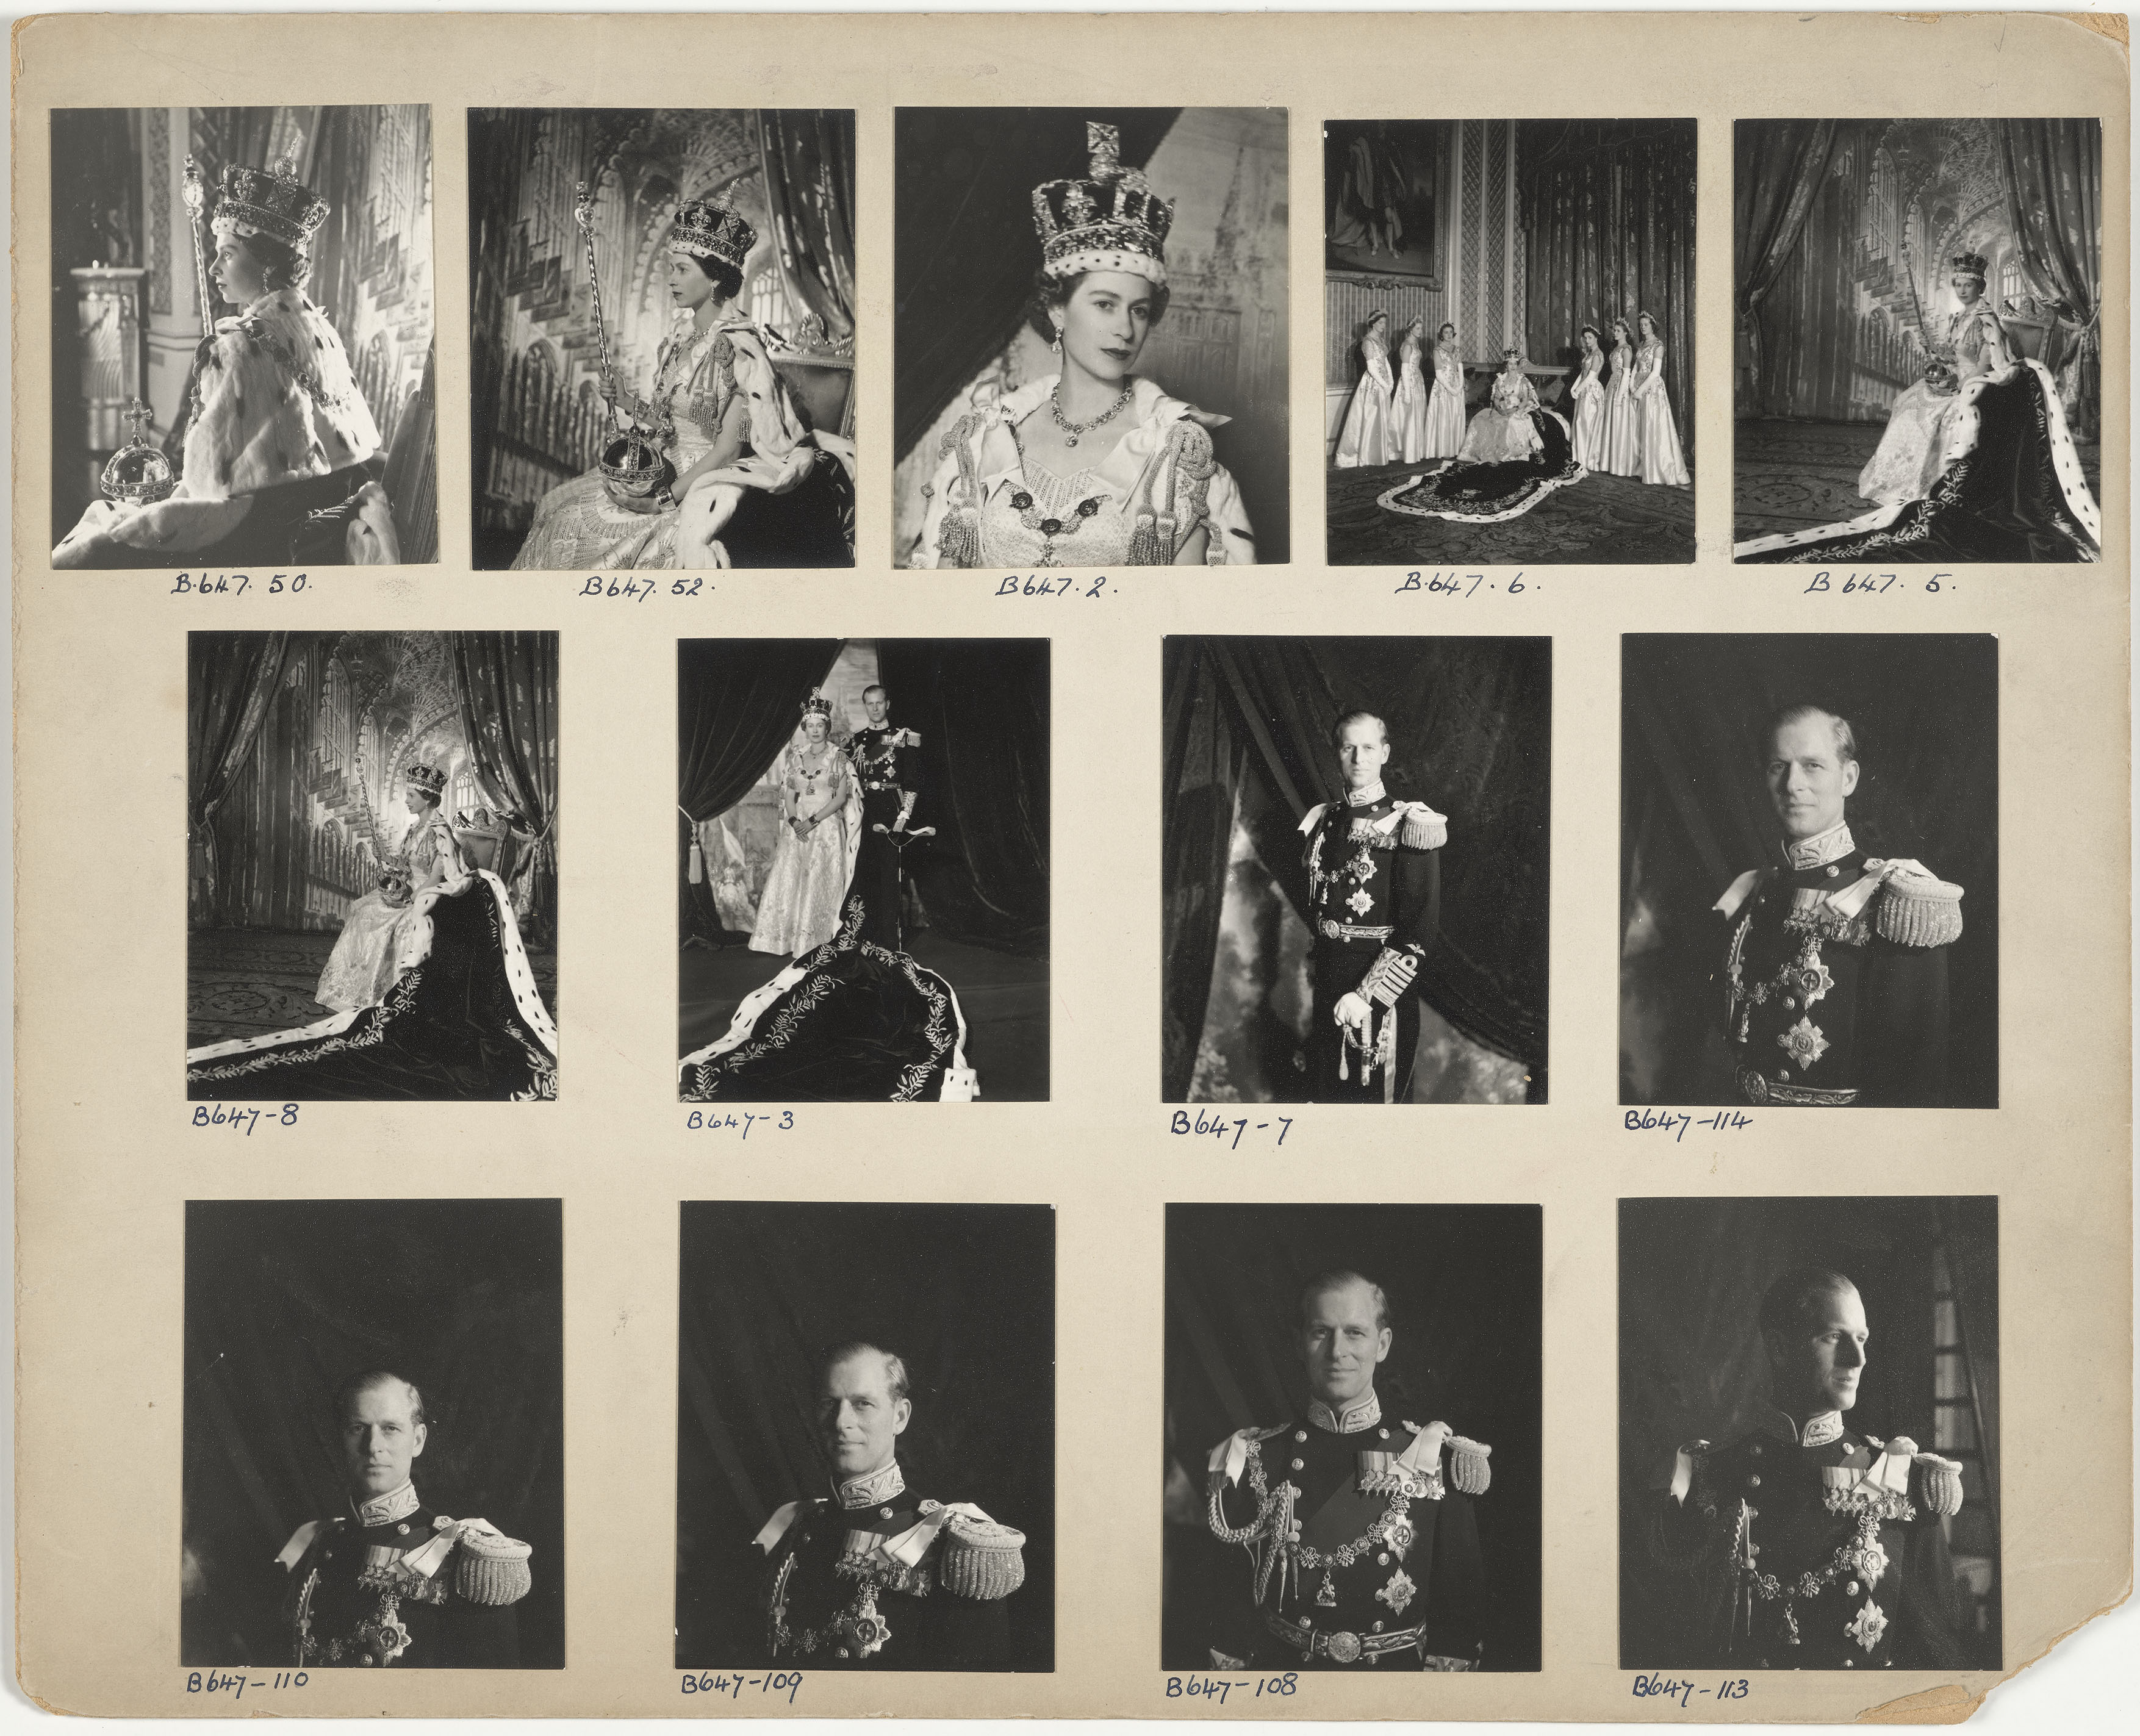 A contact sheet of proofs from the Queen's Coronation sitting with lots of individual photos